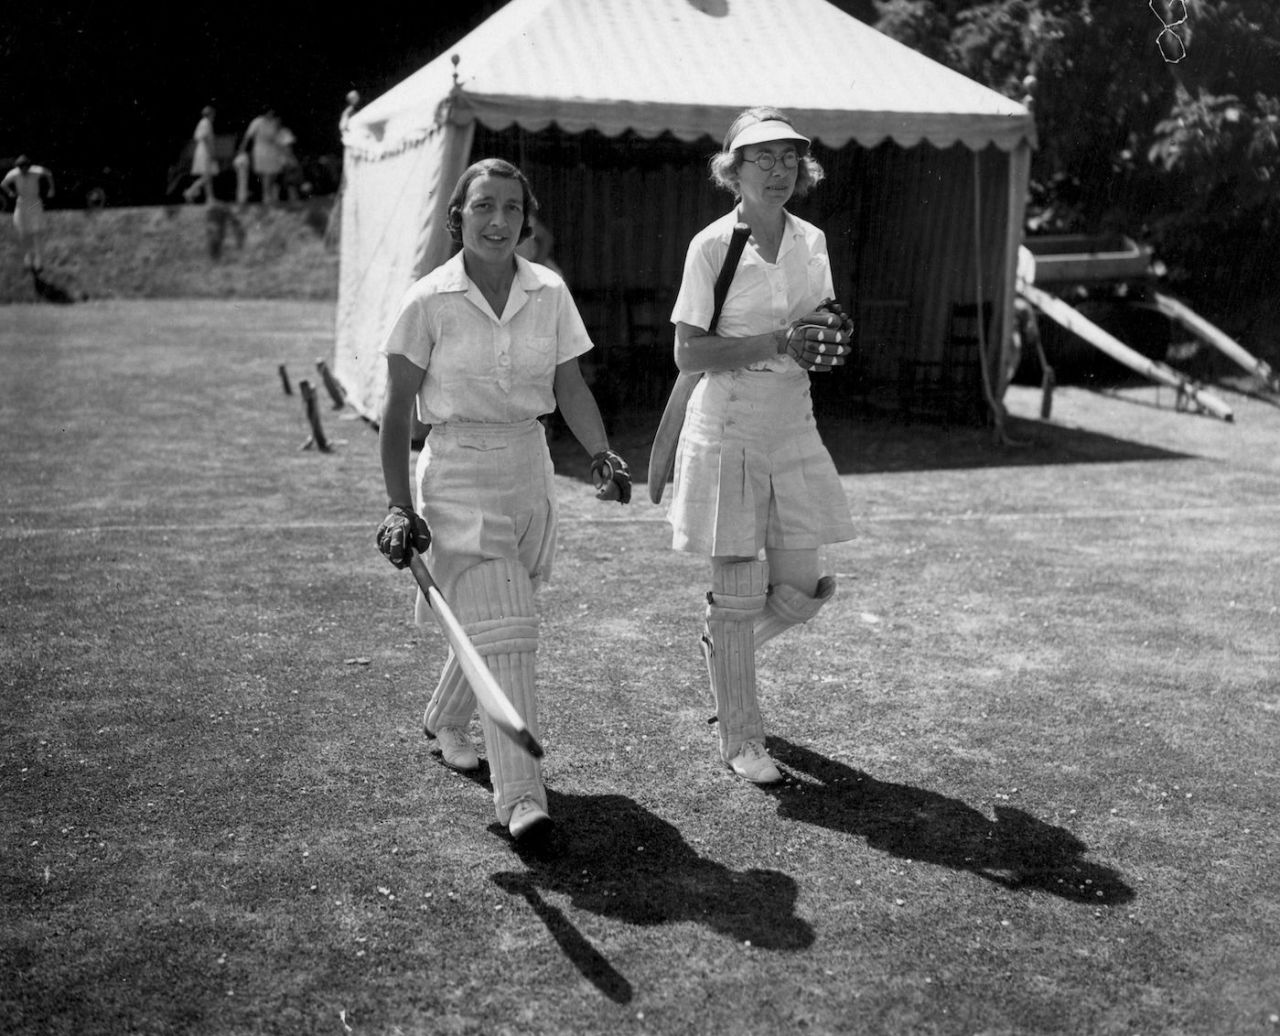 Betty Snowball (left) and T Dutton walk out to open the batting, Arundel Castle, Sussex, June 10, 1939